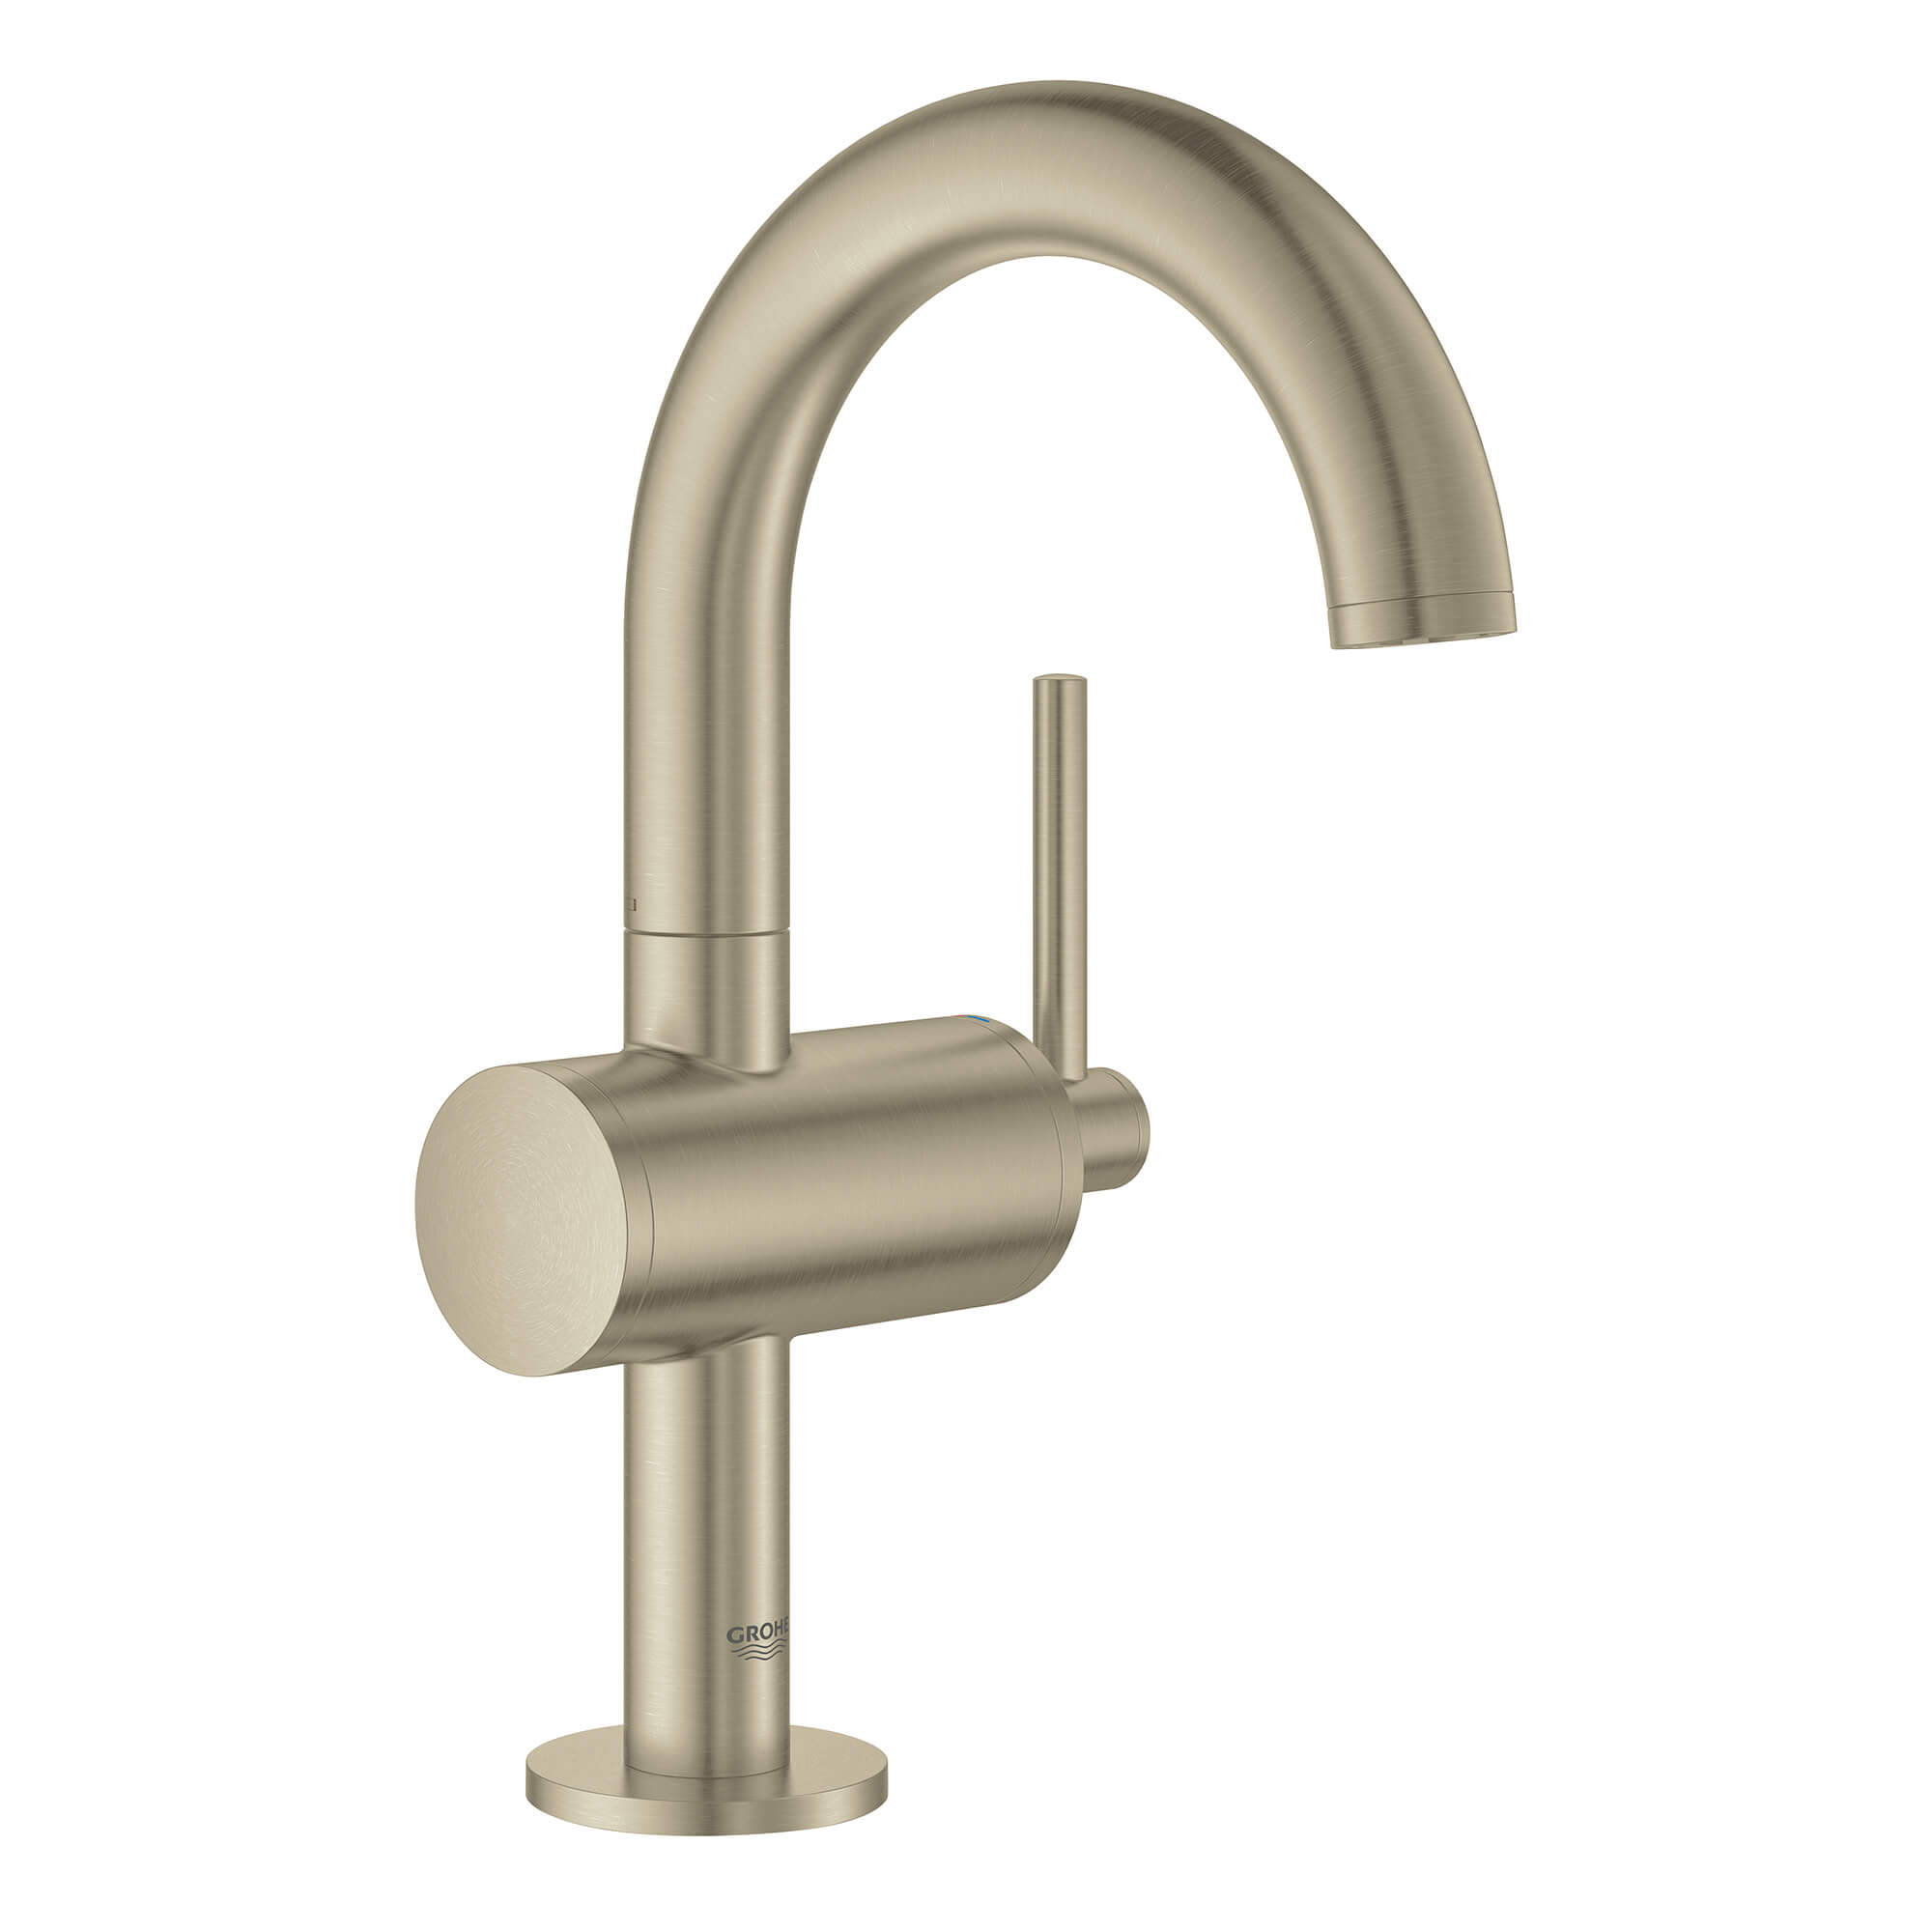 Robinet monotrou taille M BRUSHED NICKEL